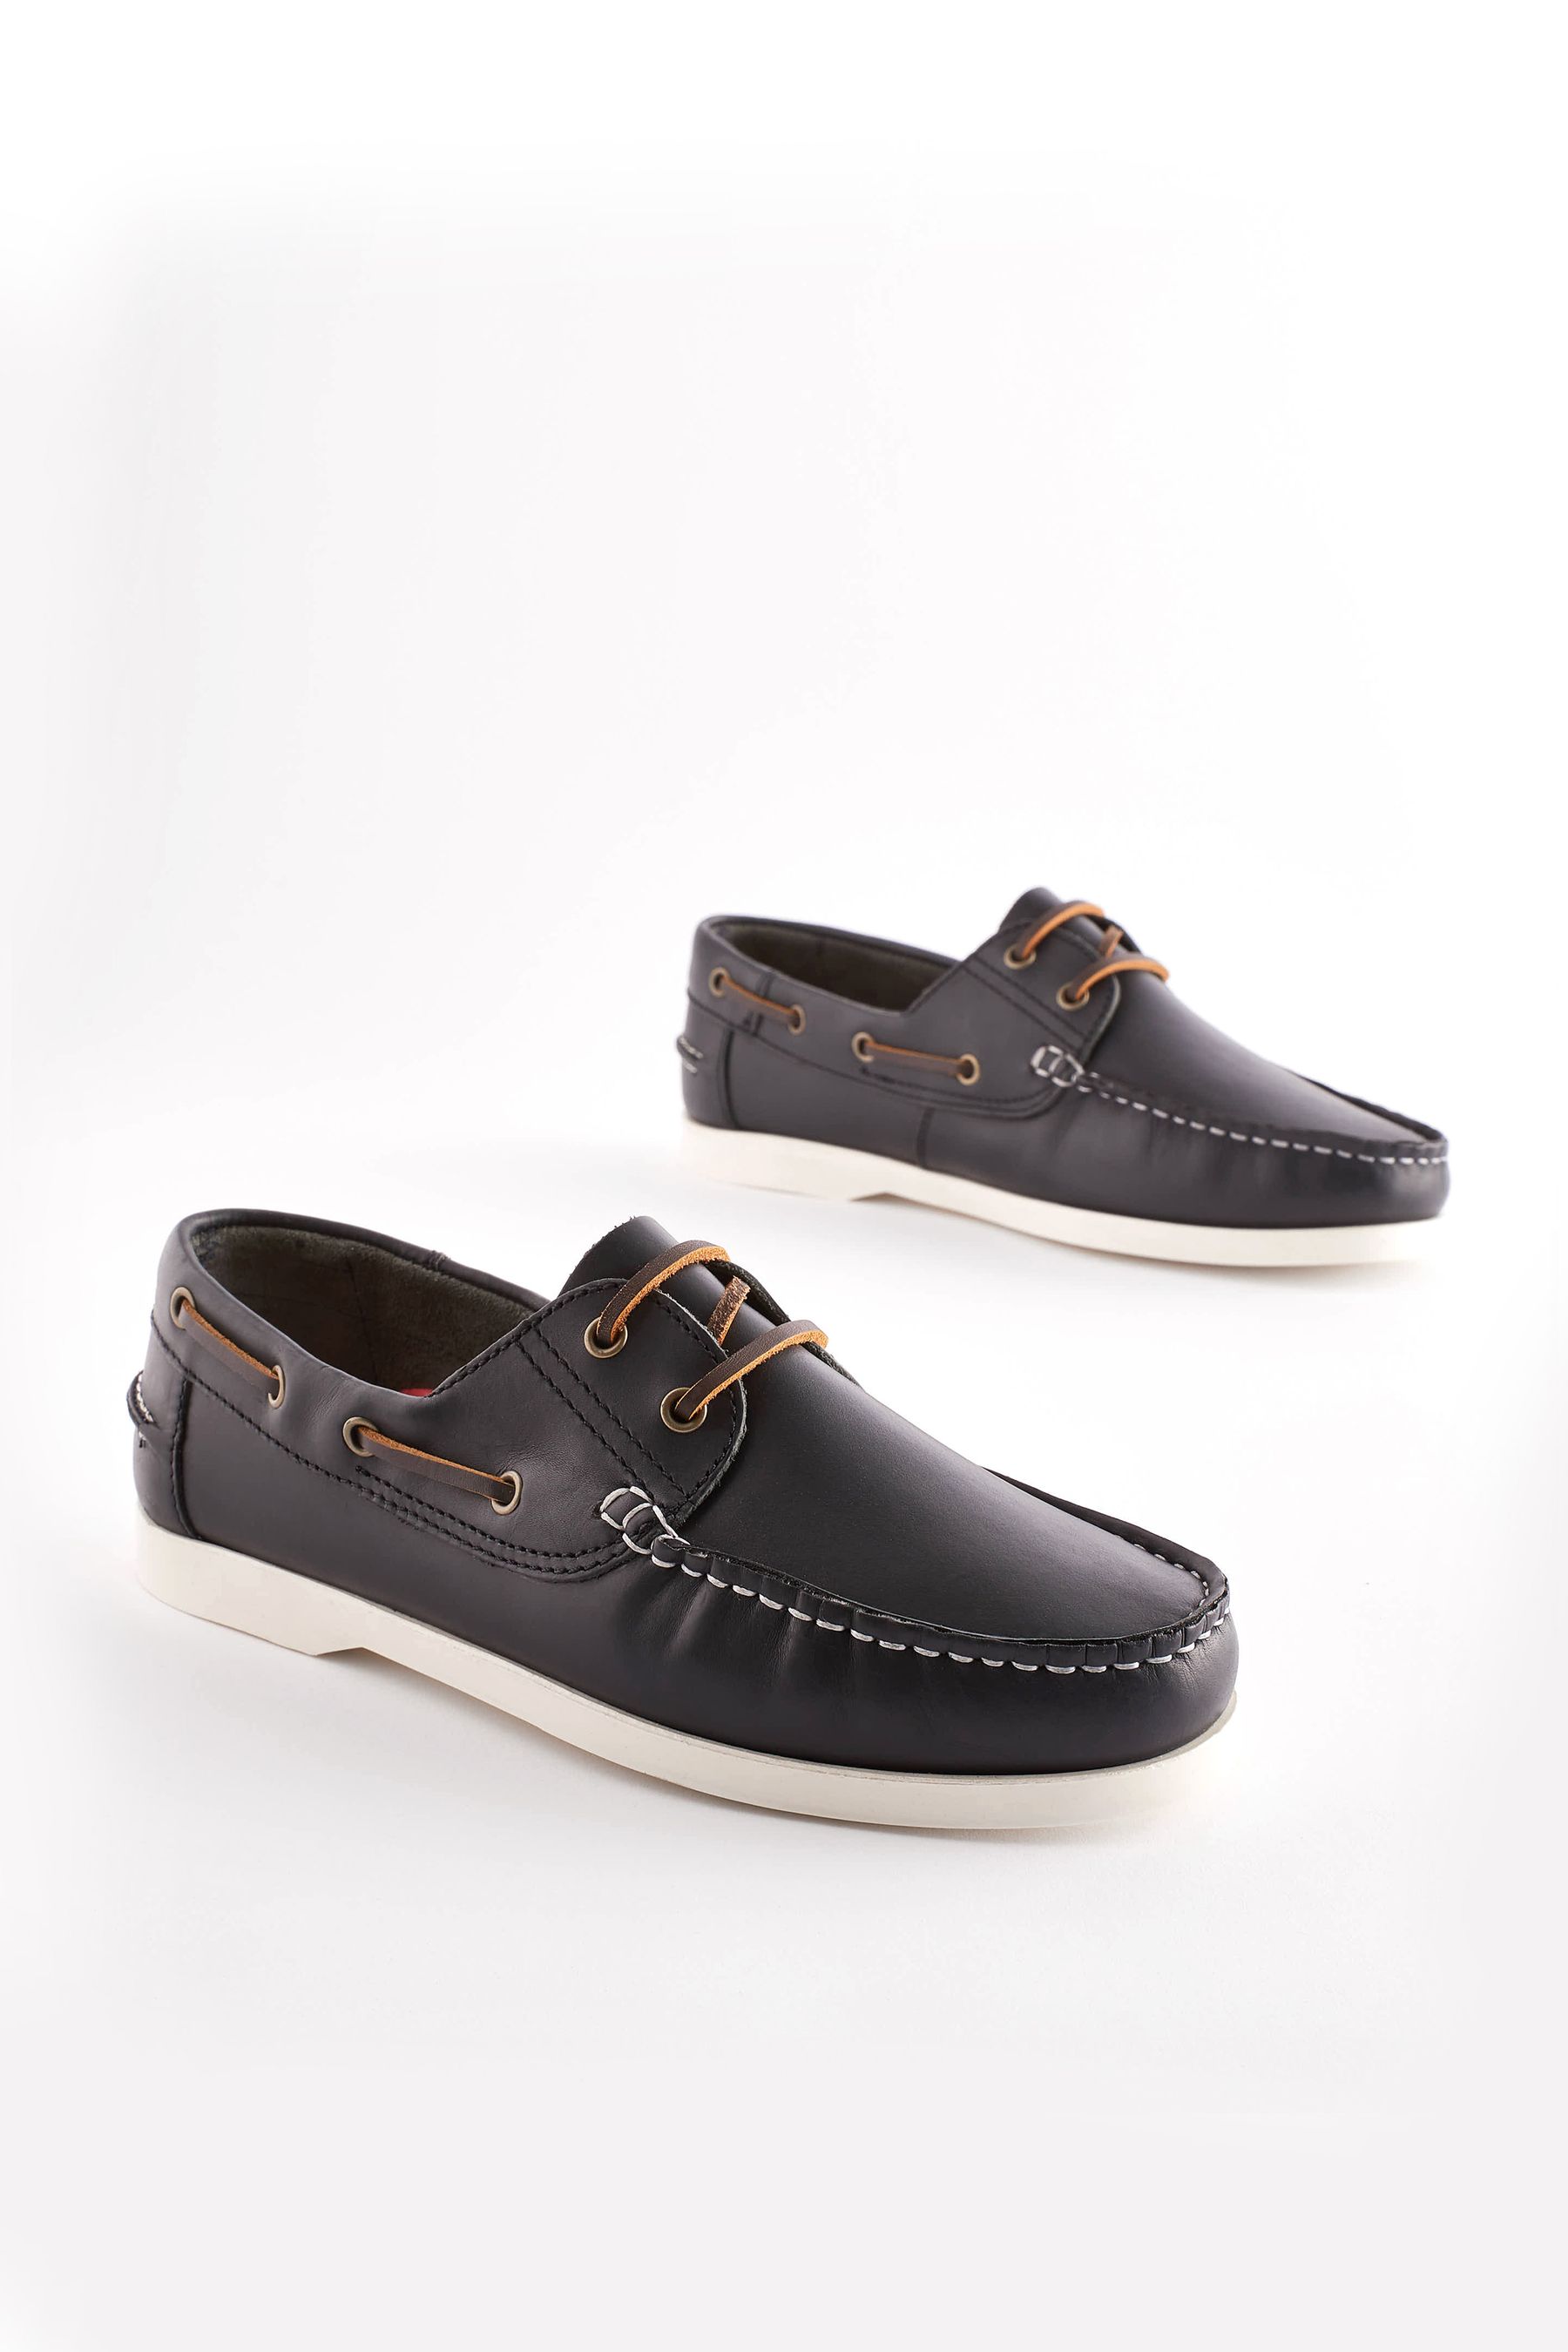 Buy Classic Leather Boat Shoes from Next Ireland